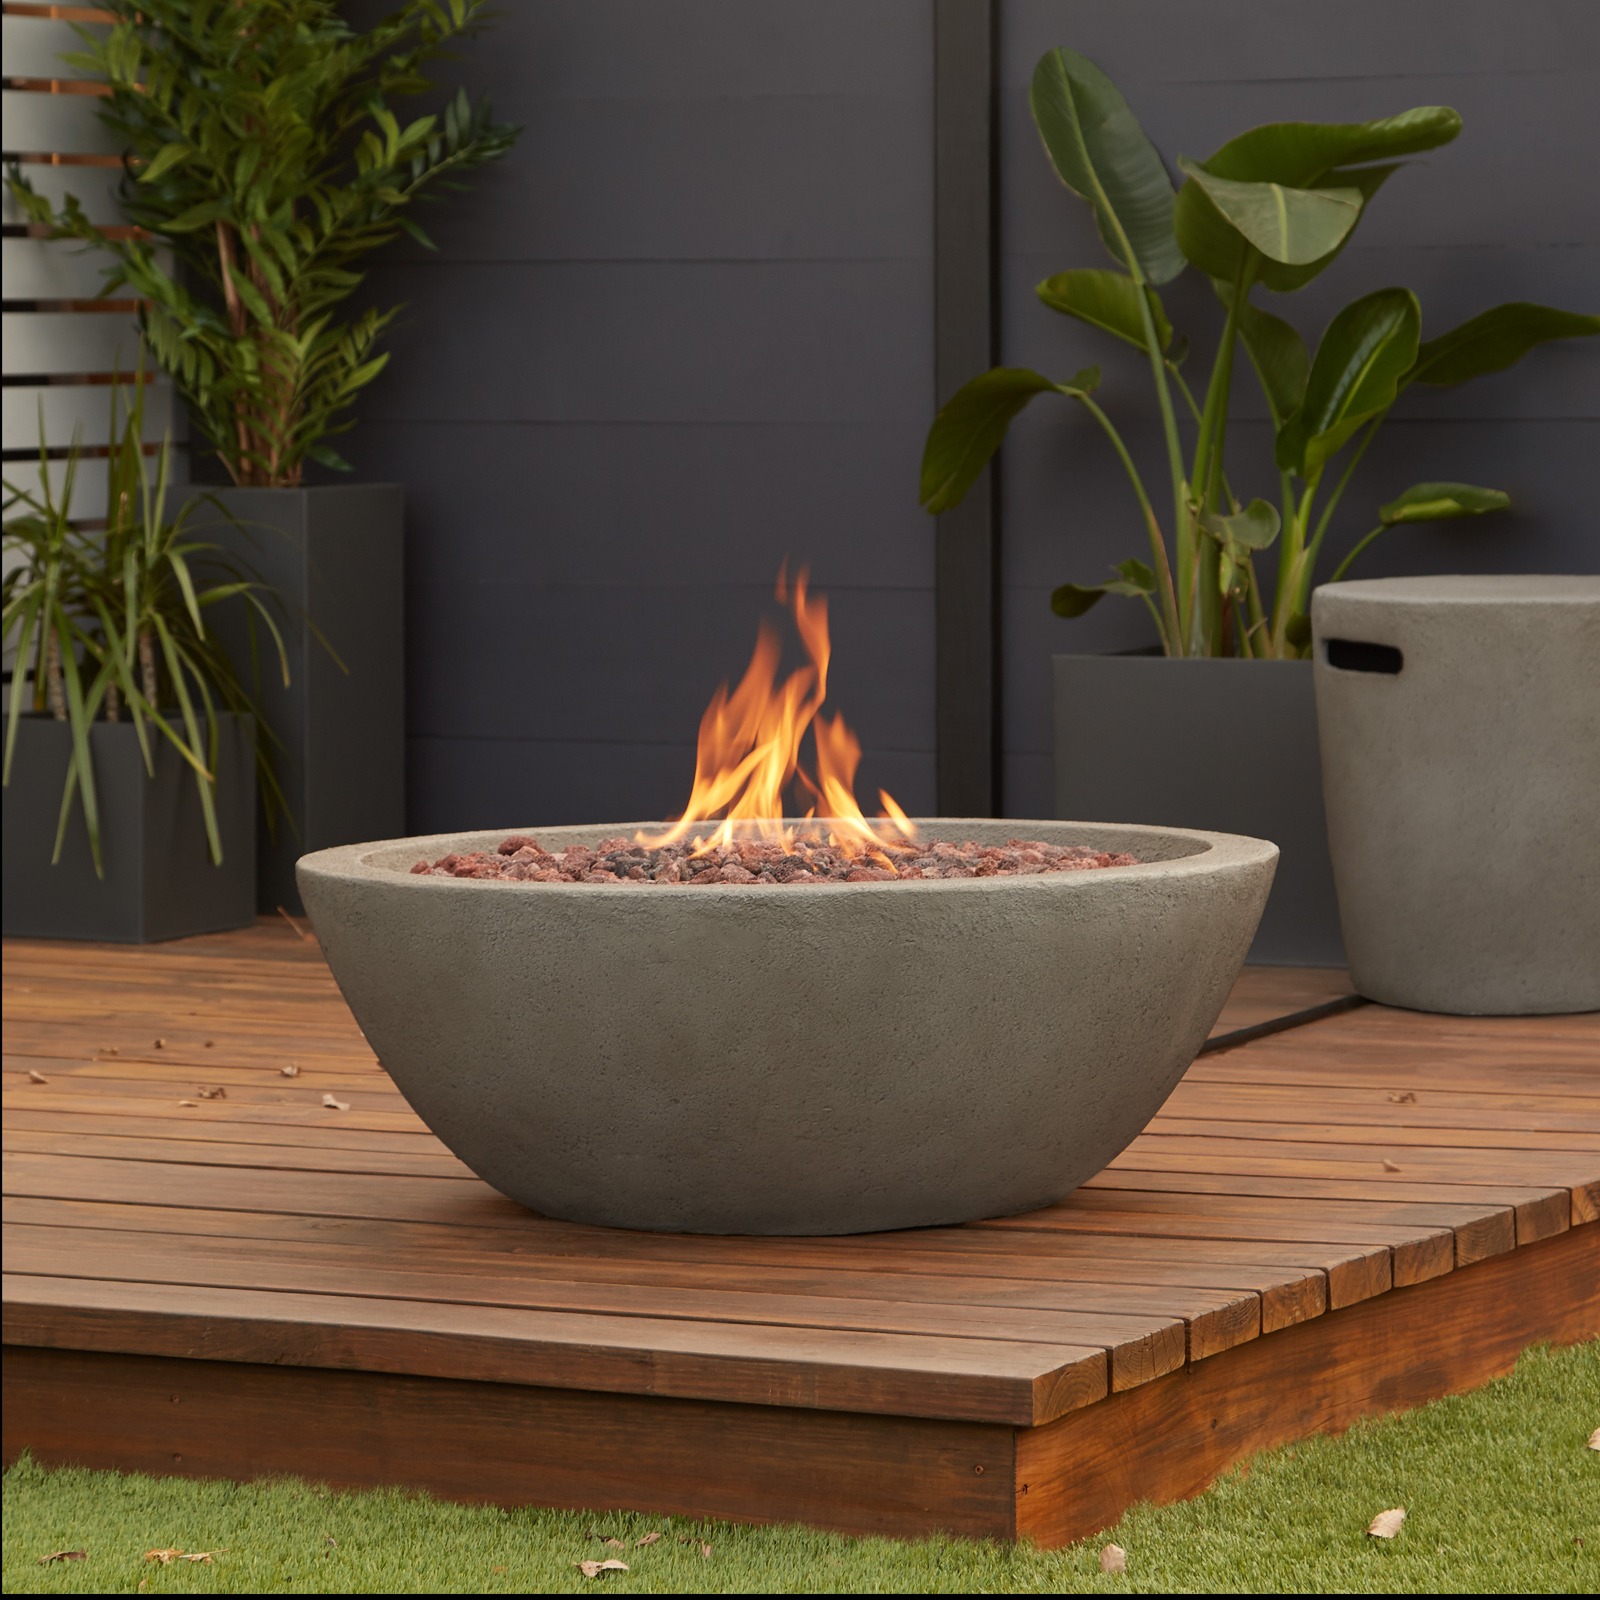 Riverside Propane Fire Pit Fire Bowl Outdoor Fireplace Fire Table for Backyard or Patio